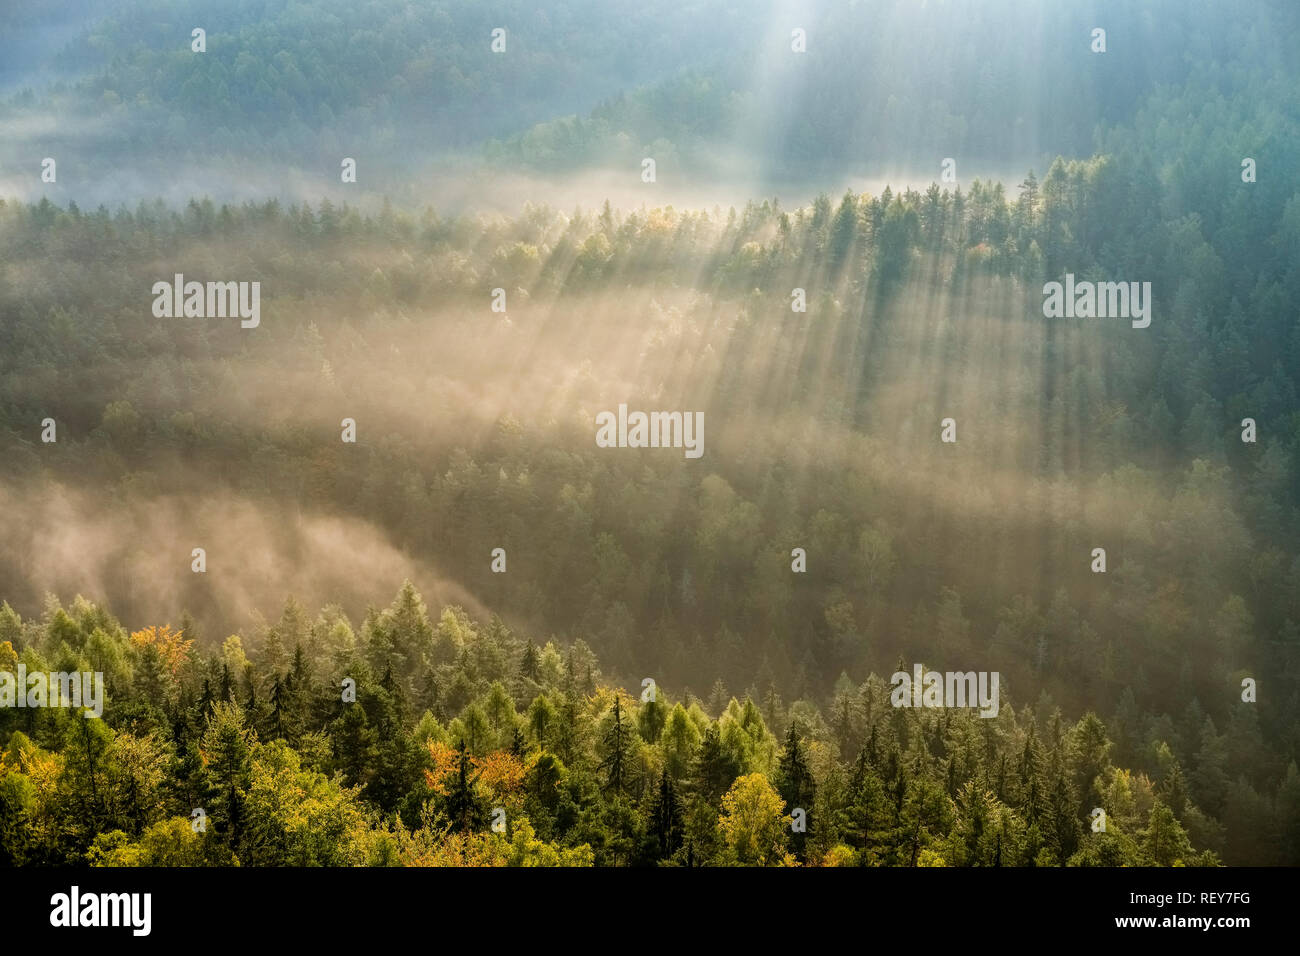 Landscape in the National Park Sächsische Schweiz with trees and fog at sunrise Stock Photo